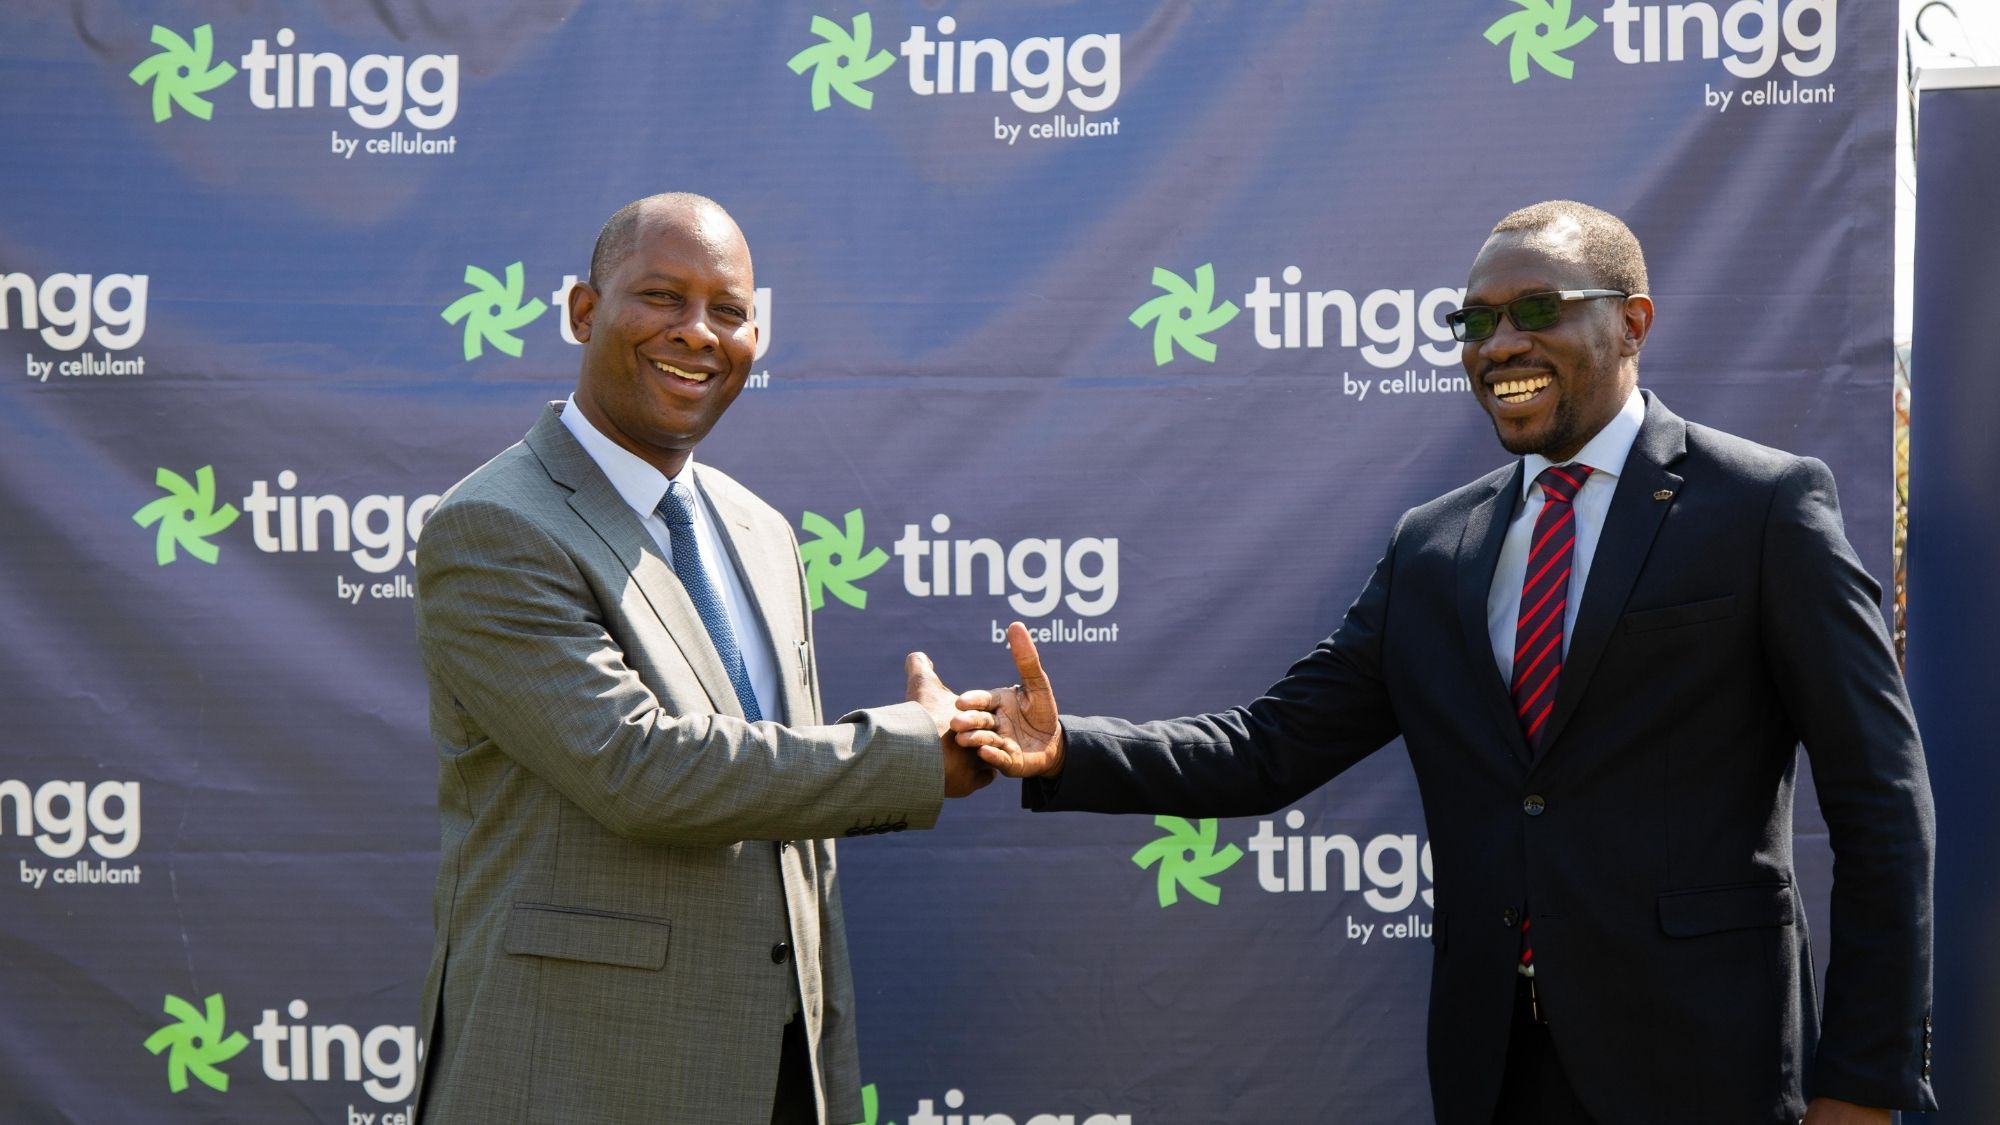 Cellulant Signs Partnership to Provide Digital Payments Solutions in Zambia